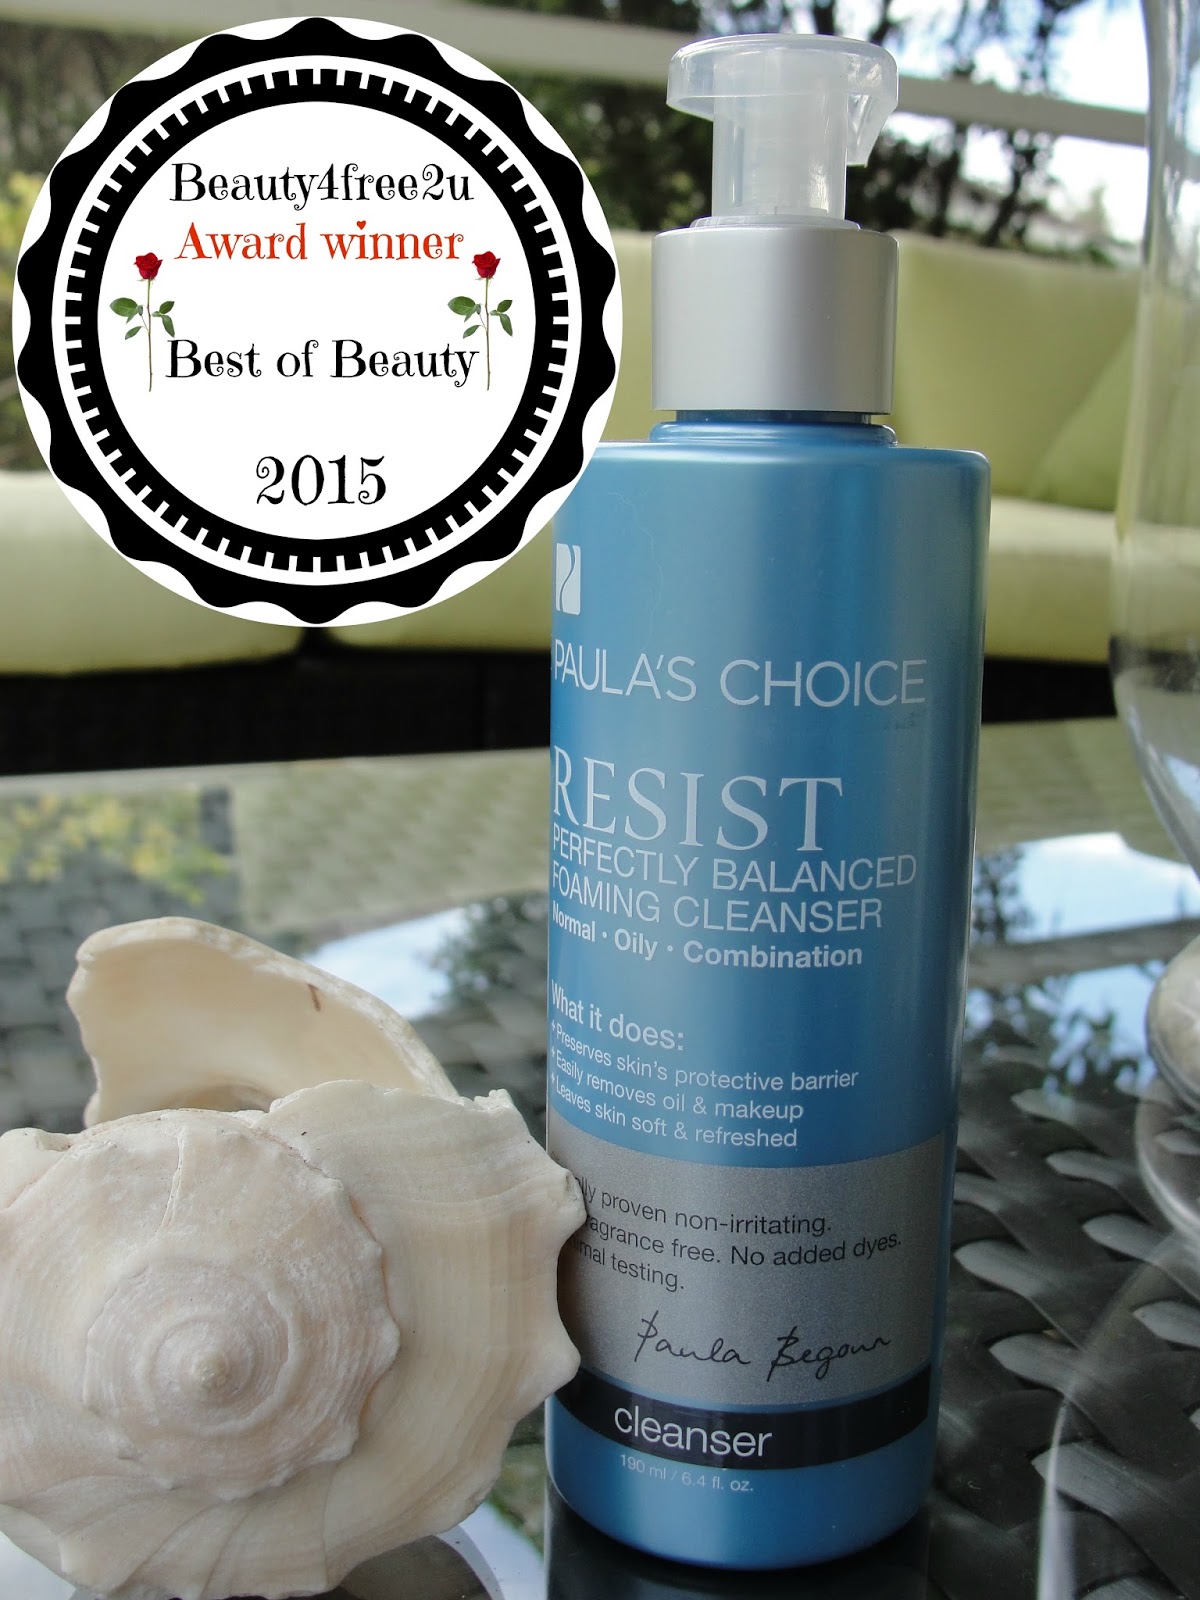 BEST SKIN CARE PRODUCTS OF 2015